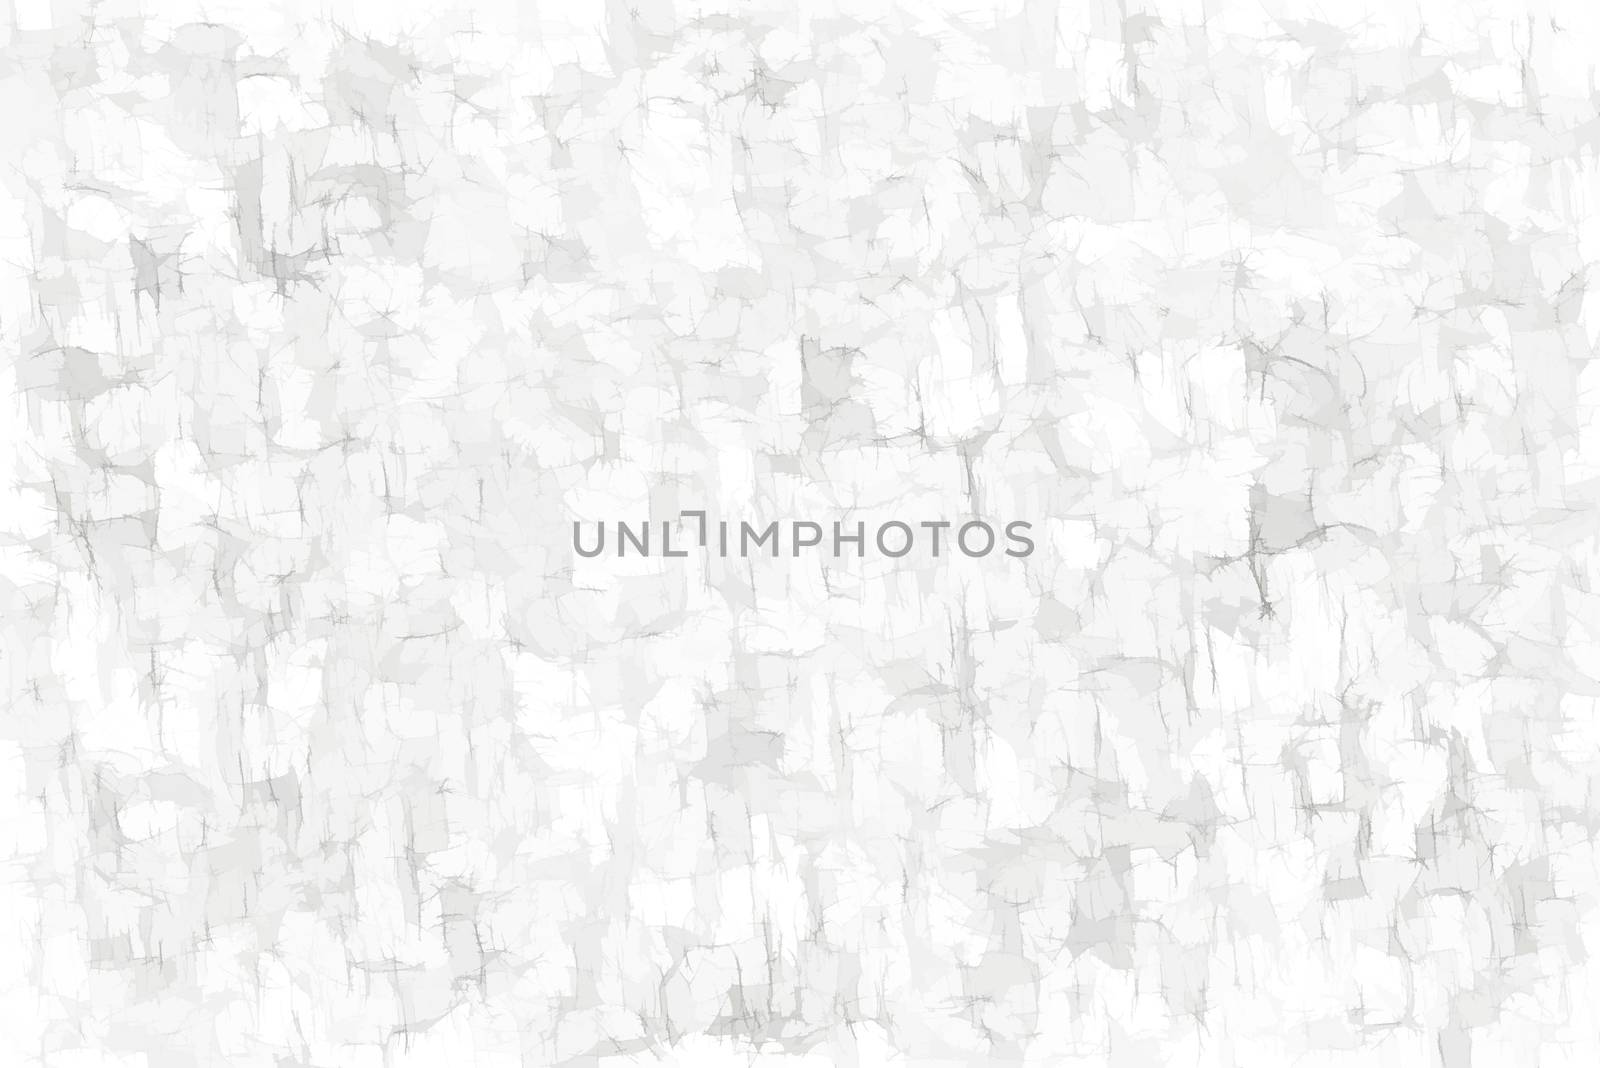 black and white background by Visual-Content